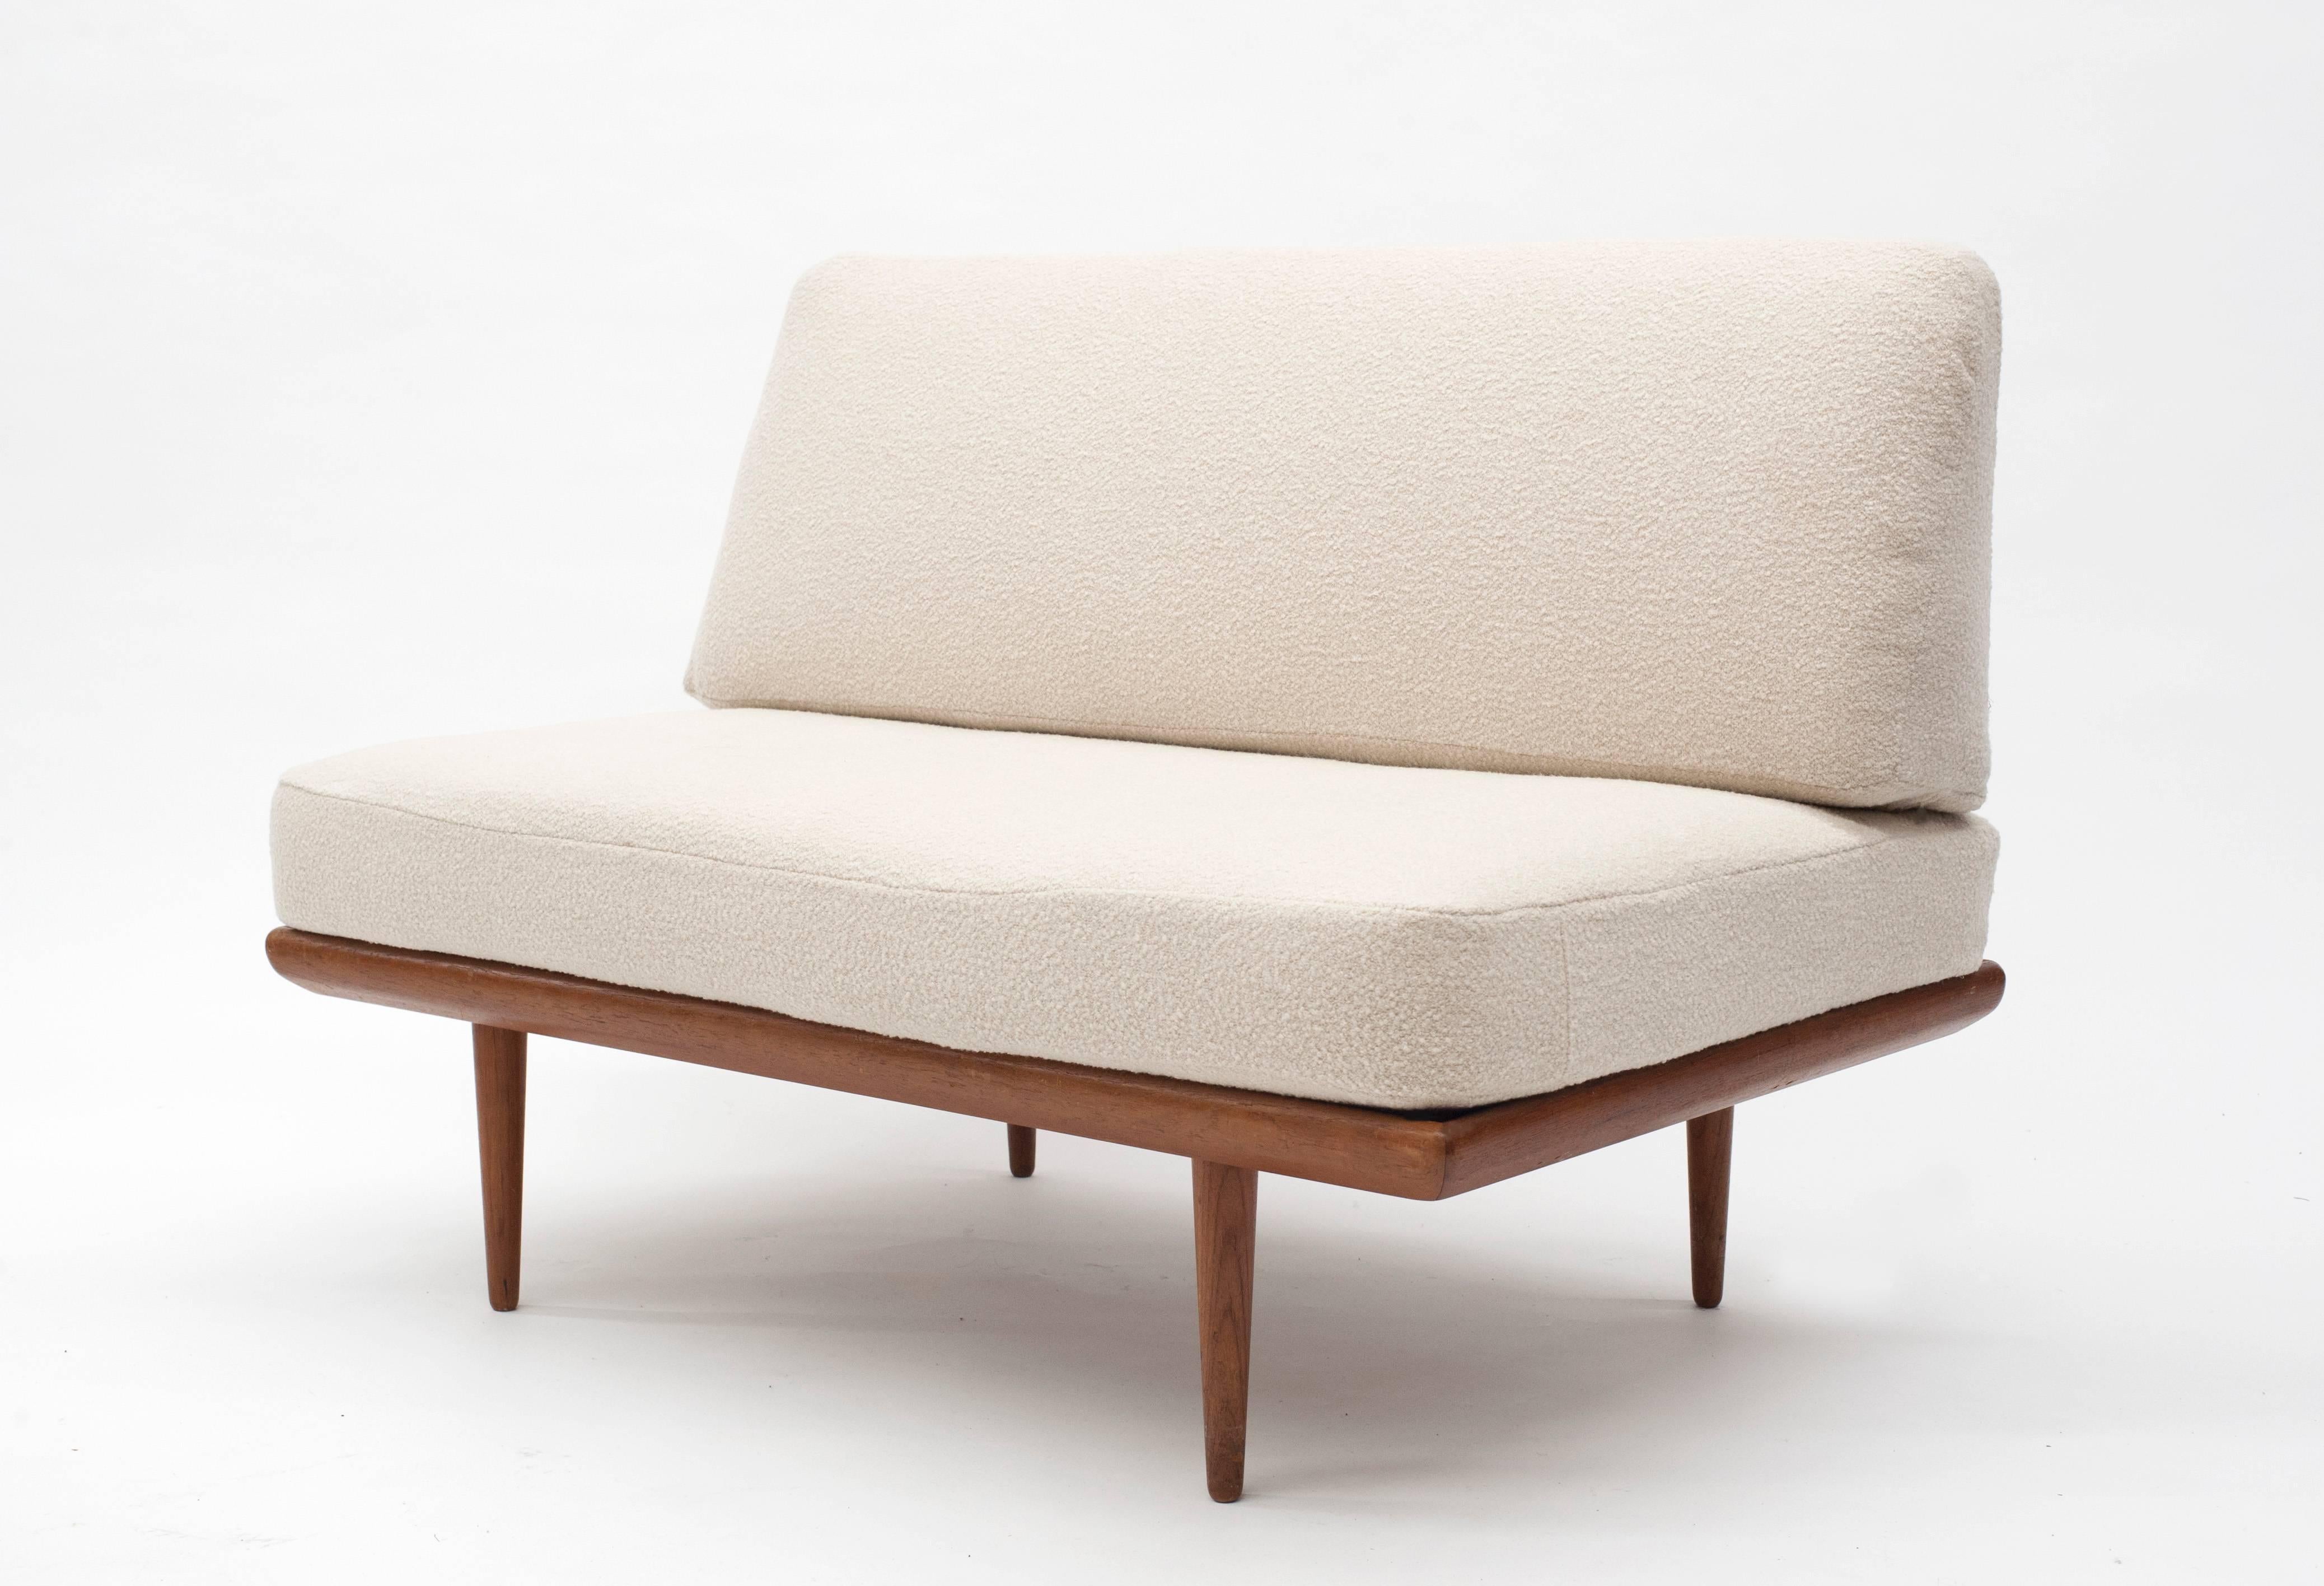 Low profile modern settee by Peter Hvidt & Orla Mølgaard-Nielsen for France & Son, Denmark. Settee comes with one arm rest and is designed for side table to be on opposite side. Inner sprung cushions are original and newly upholstered in premium